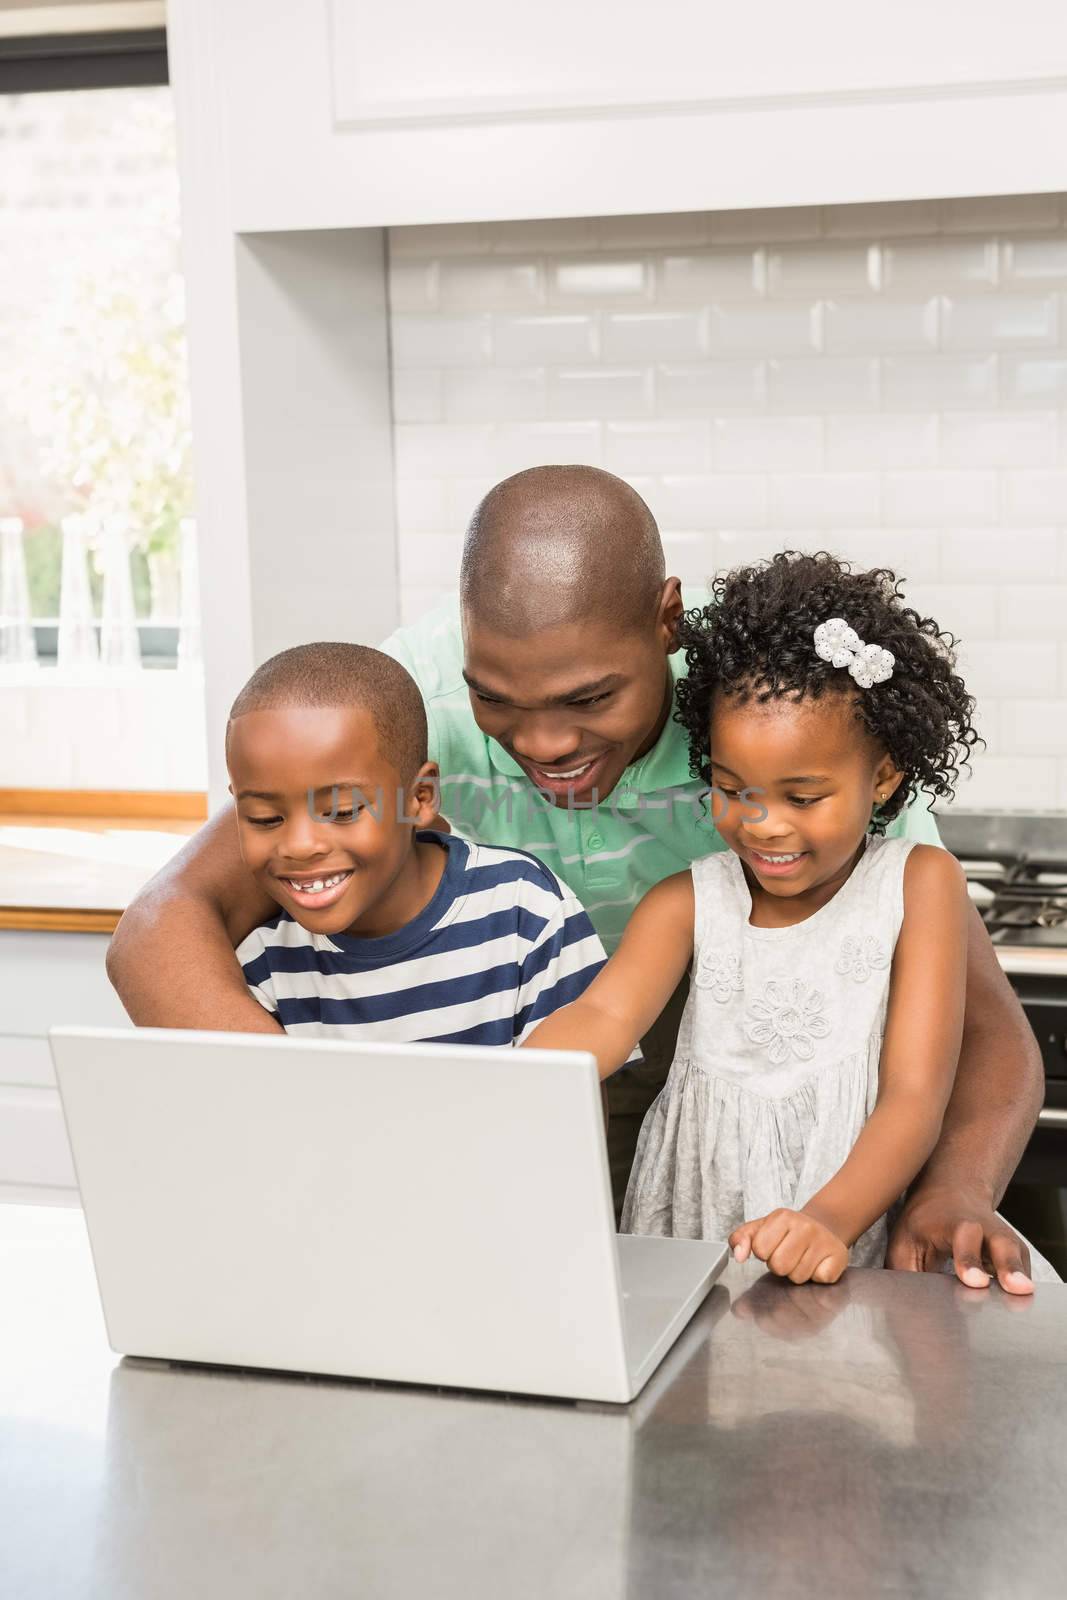 Father using laptop with his children in kitchen in kitchen at home